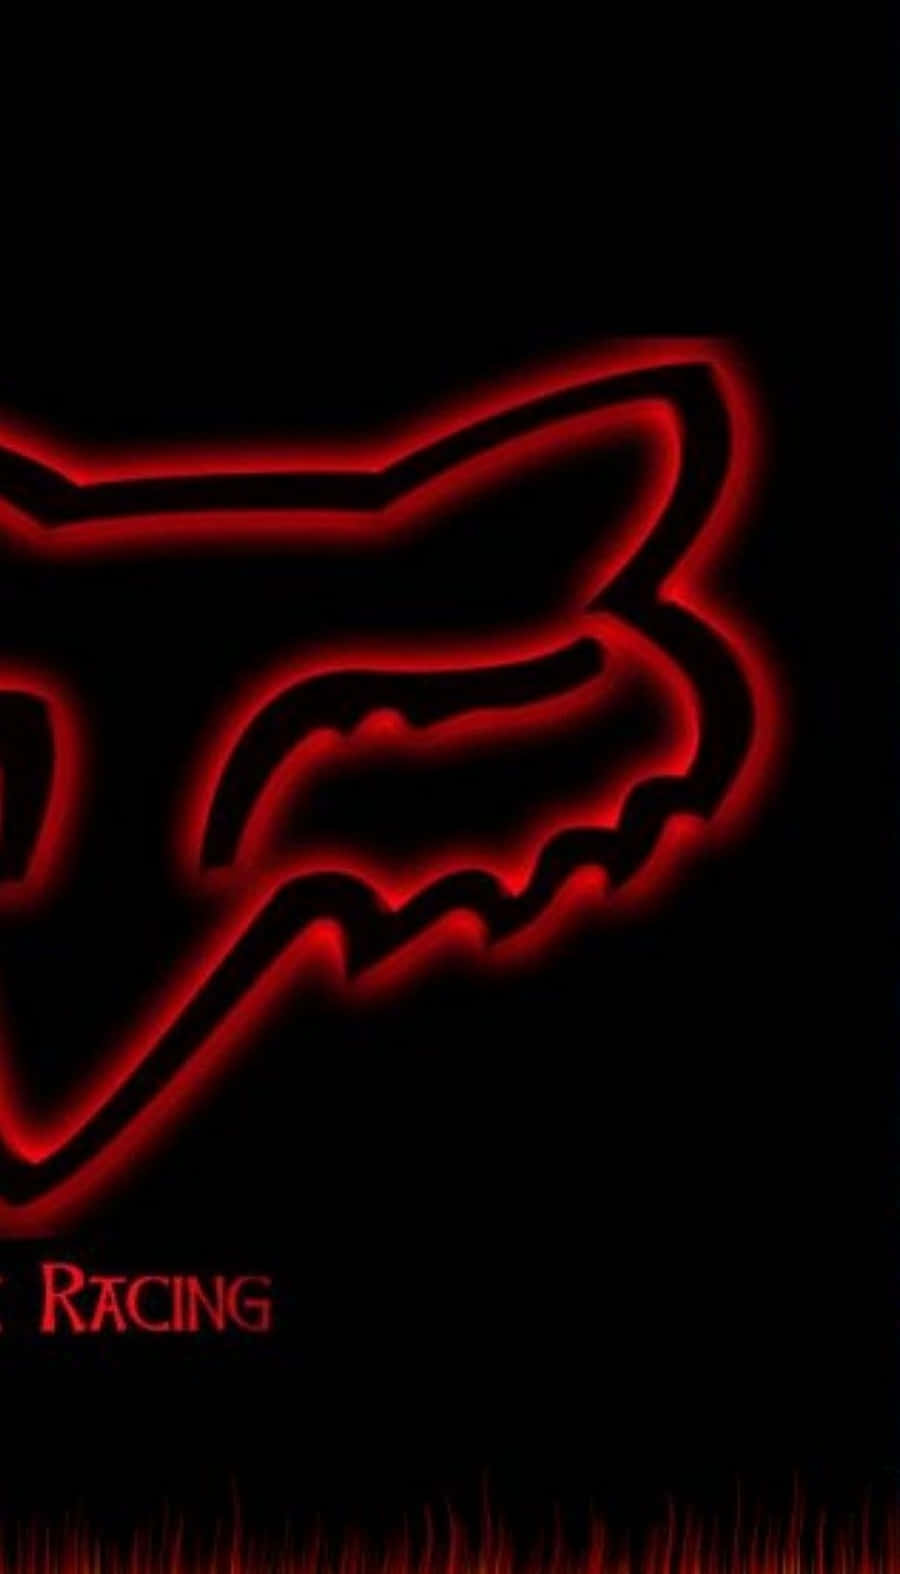 Fox Racing Logo In Red On Black Background Wallpaper